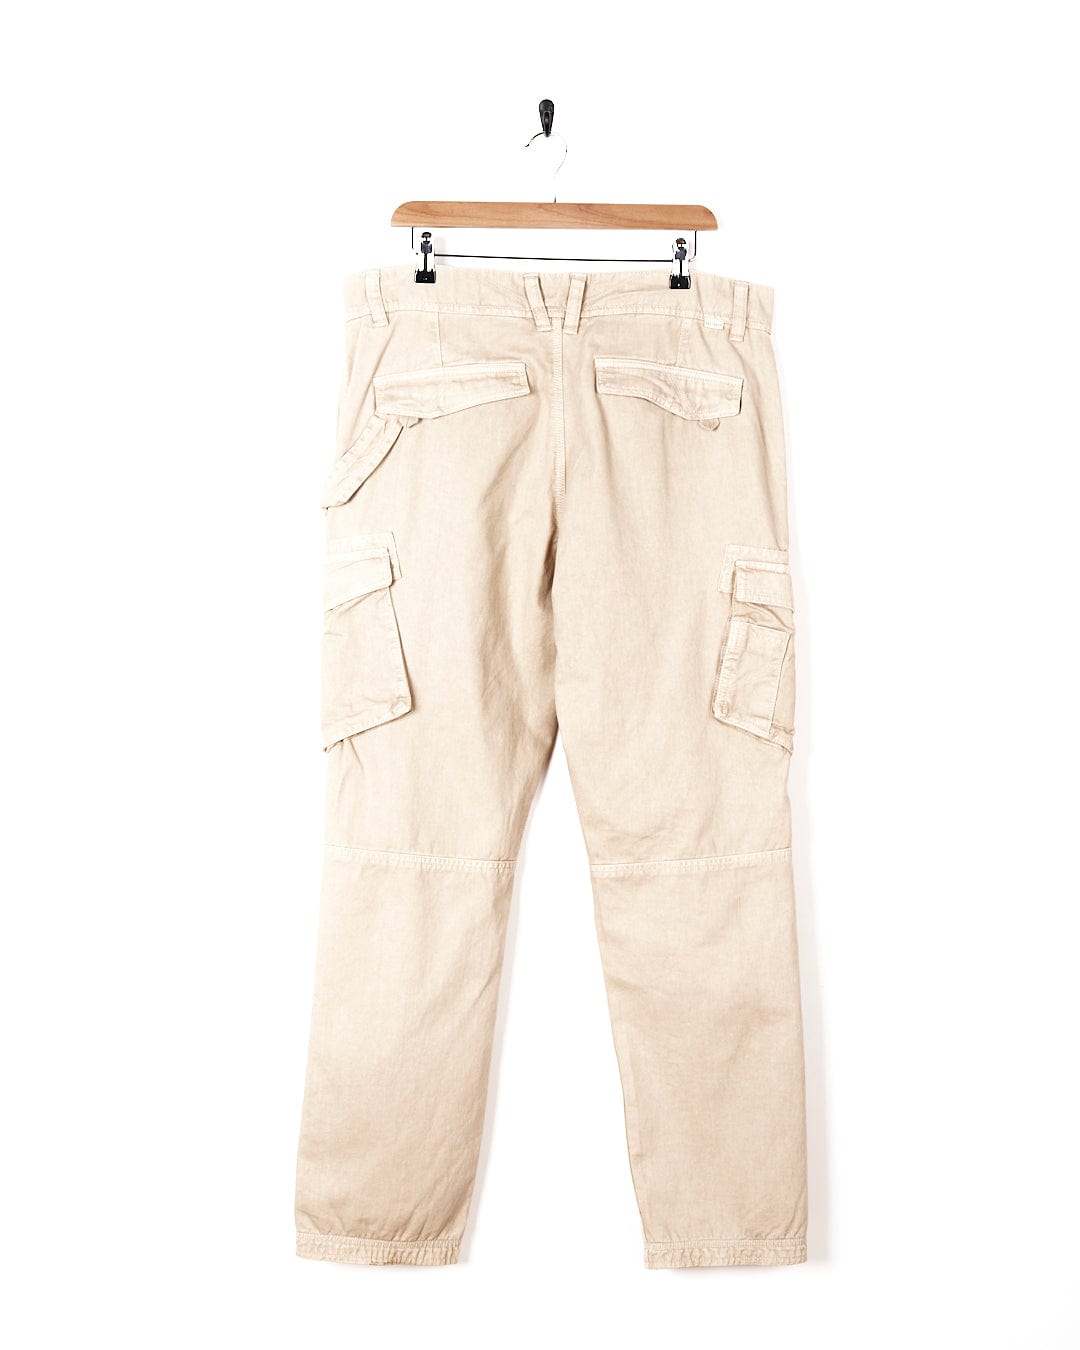 A pair of Saltrock Godrevy - Mens Cargo Trouser - Sand hanging on a hanger.